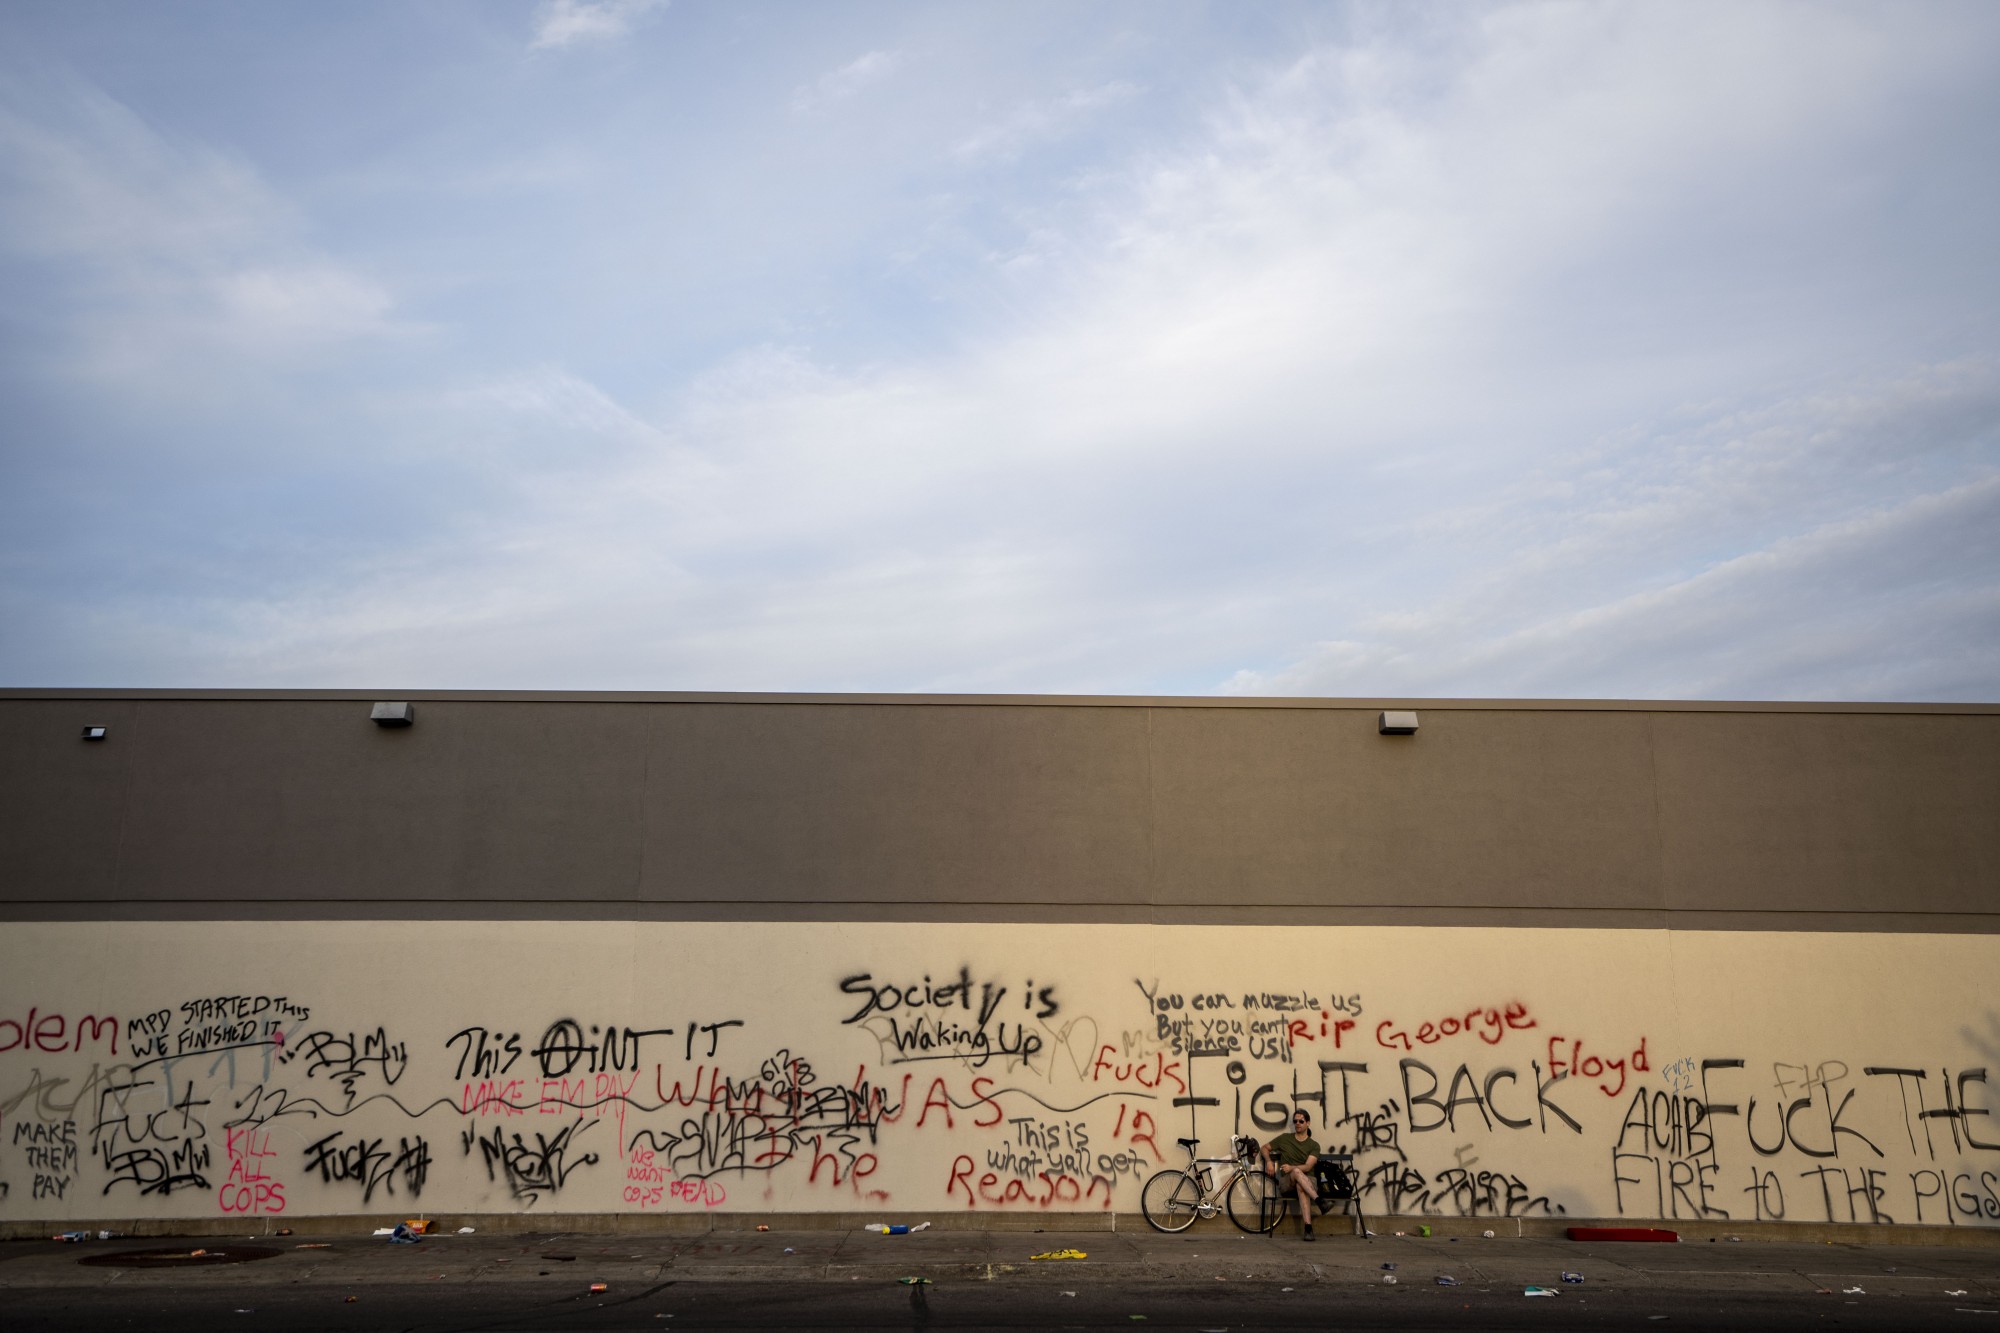 The walls of Target are seen covered in graffiti the morning after a second night of protests that turned violent near the Minneapolis Police 3rd Precinct following the death of George Floyd. Dozens of businesses were vandalized and firefighters were still working to control several blazes still at hand on Thursday, May 28. 